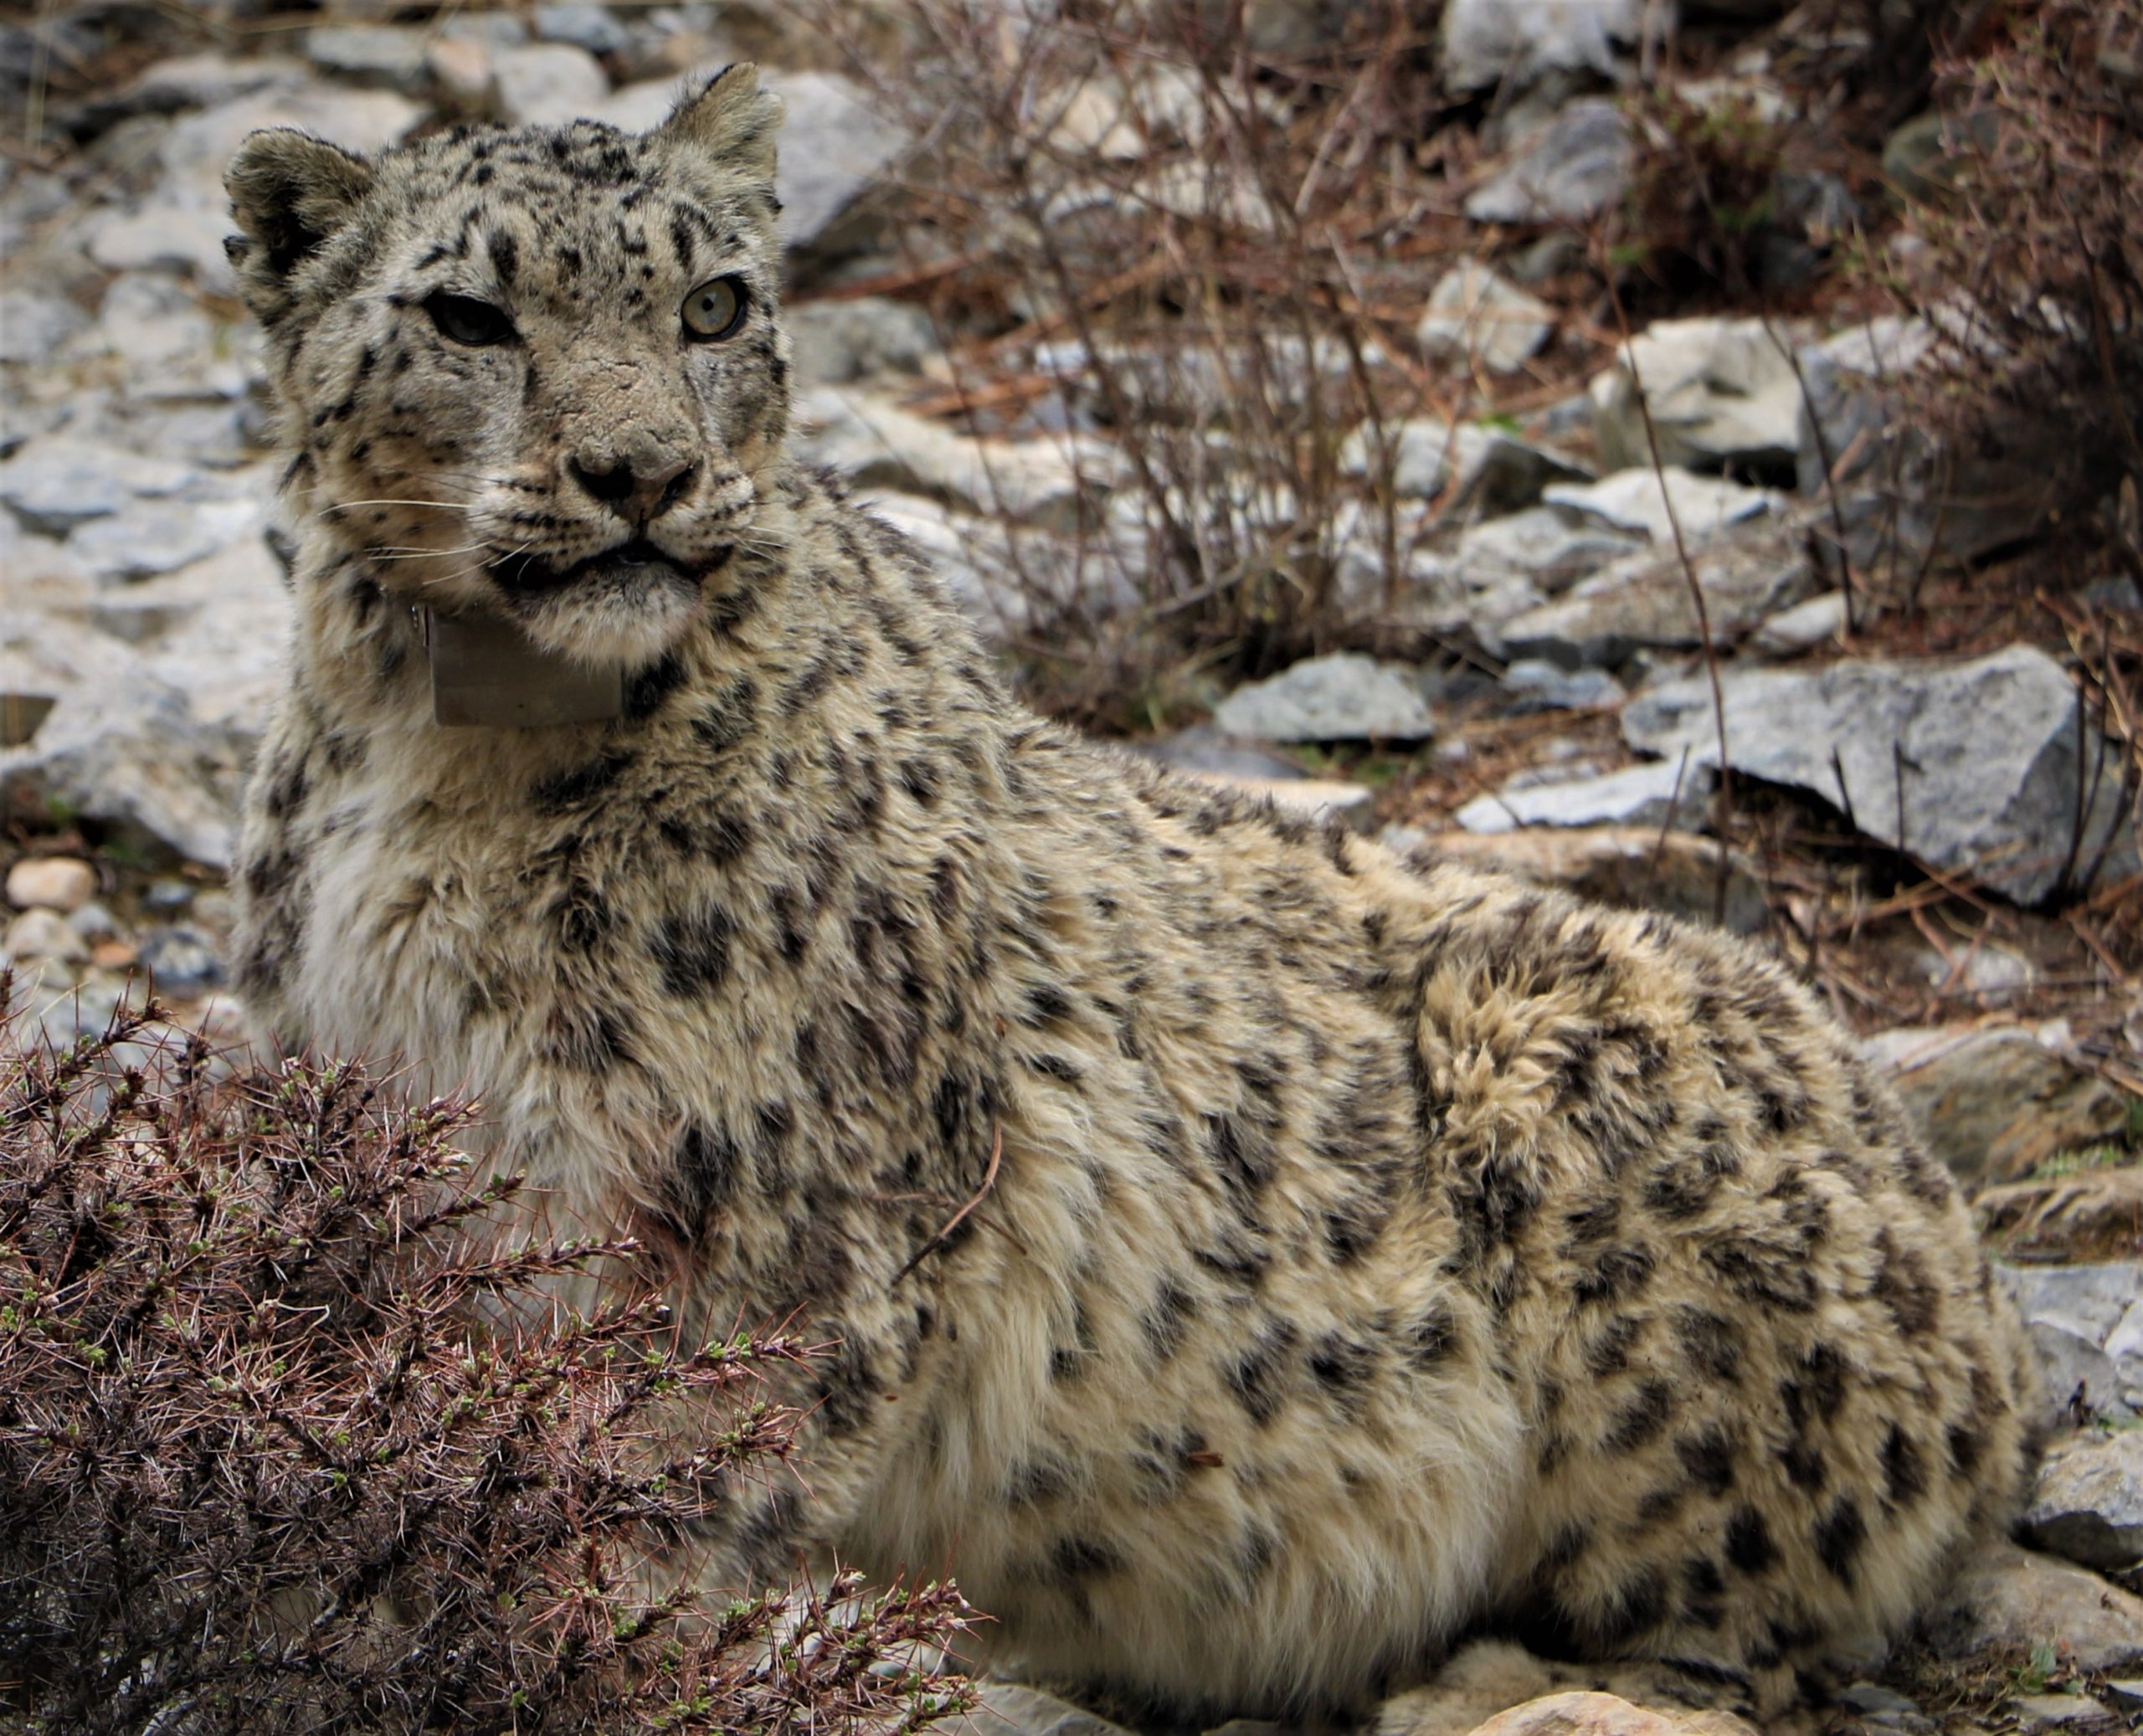 <p>Ghangri Gapi Hyul, the first snow leopard collared during the expedition in Nisyal, Nepal (Image: DNPWC / WWF Nepal)</p>